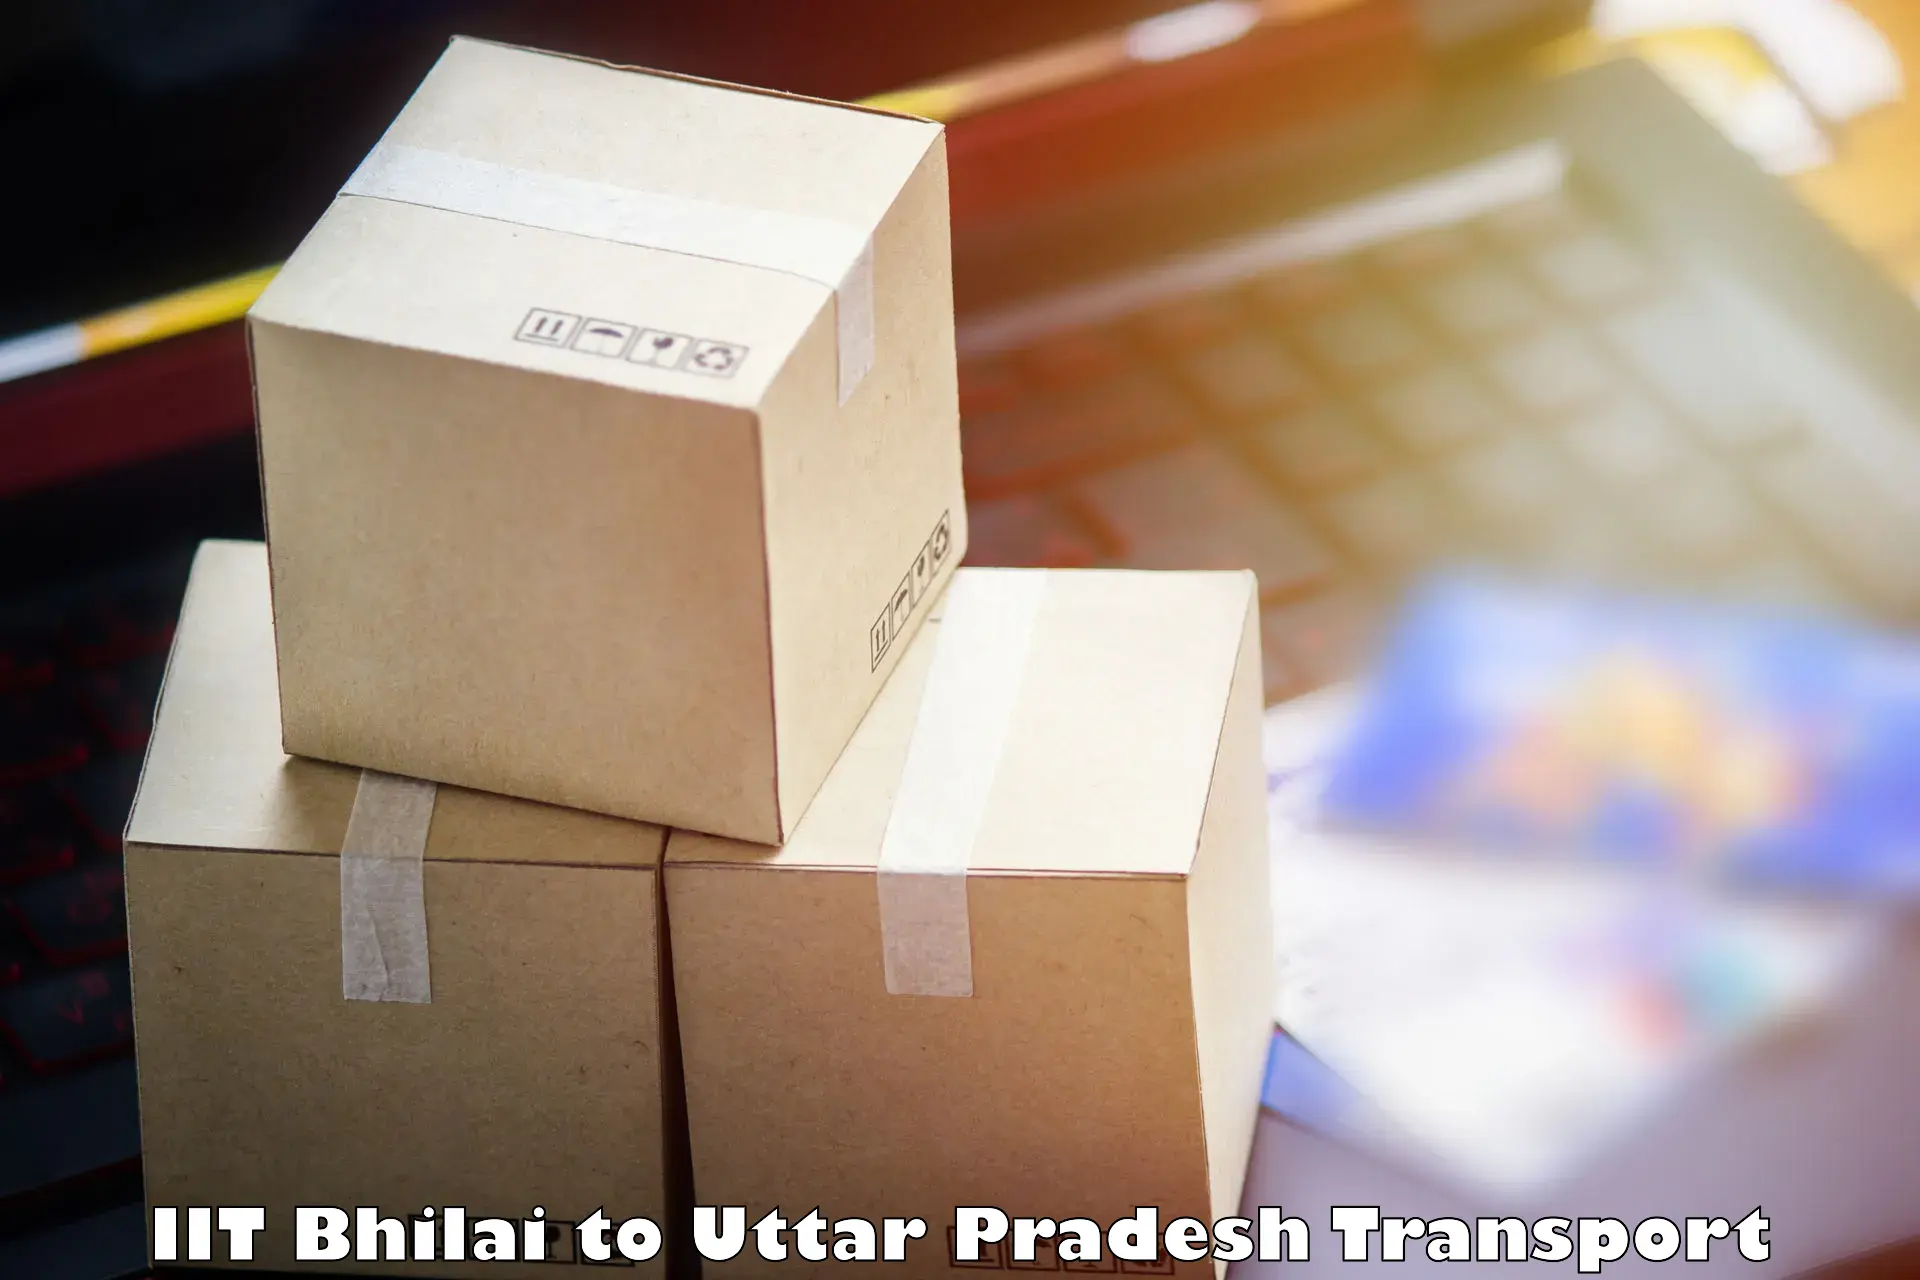 Cargo train transport services in IIT Bhilai to Shahjahanpur